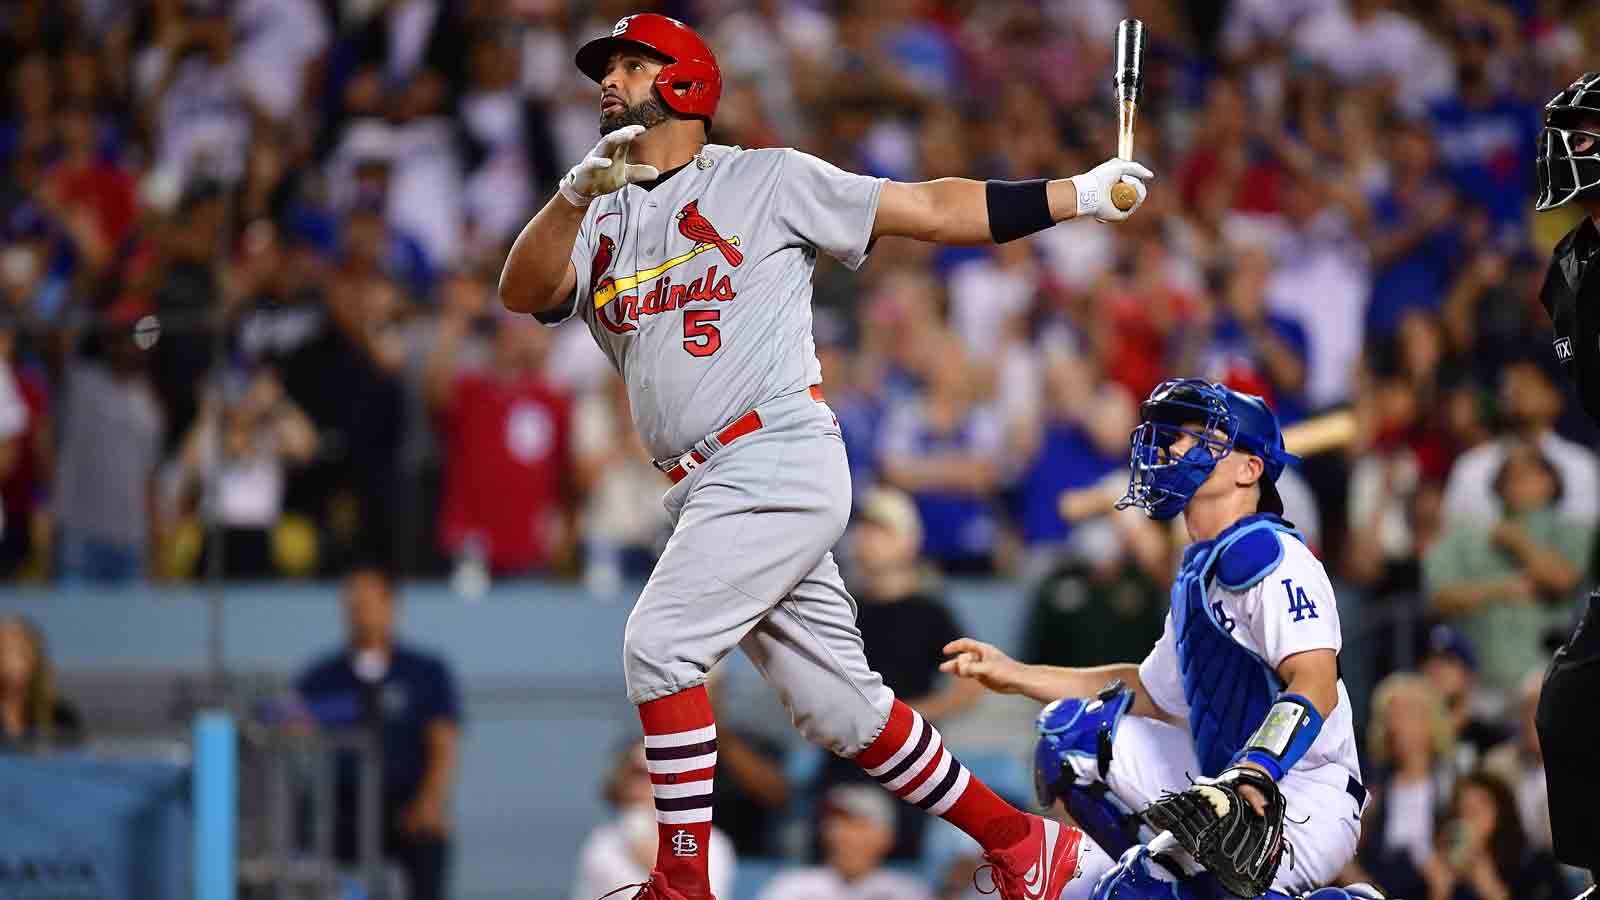 Photo: Cardinals Albert Pujols strikes out during game 6 of the World  Series in St. Louis - STL20111027206 